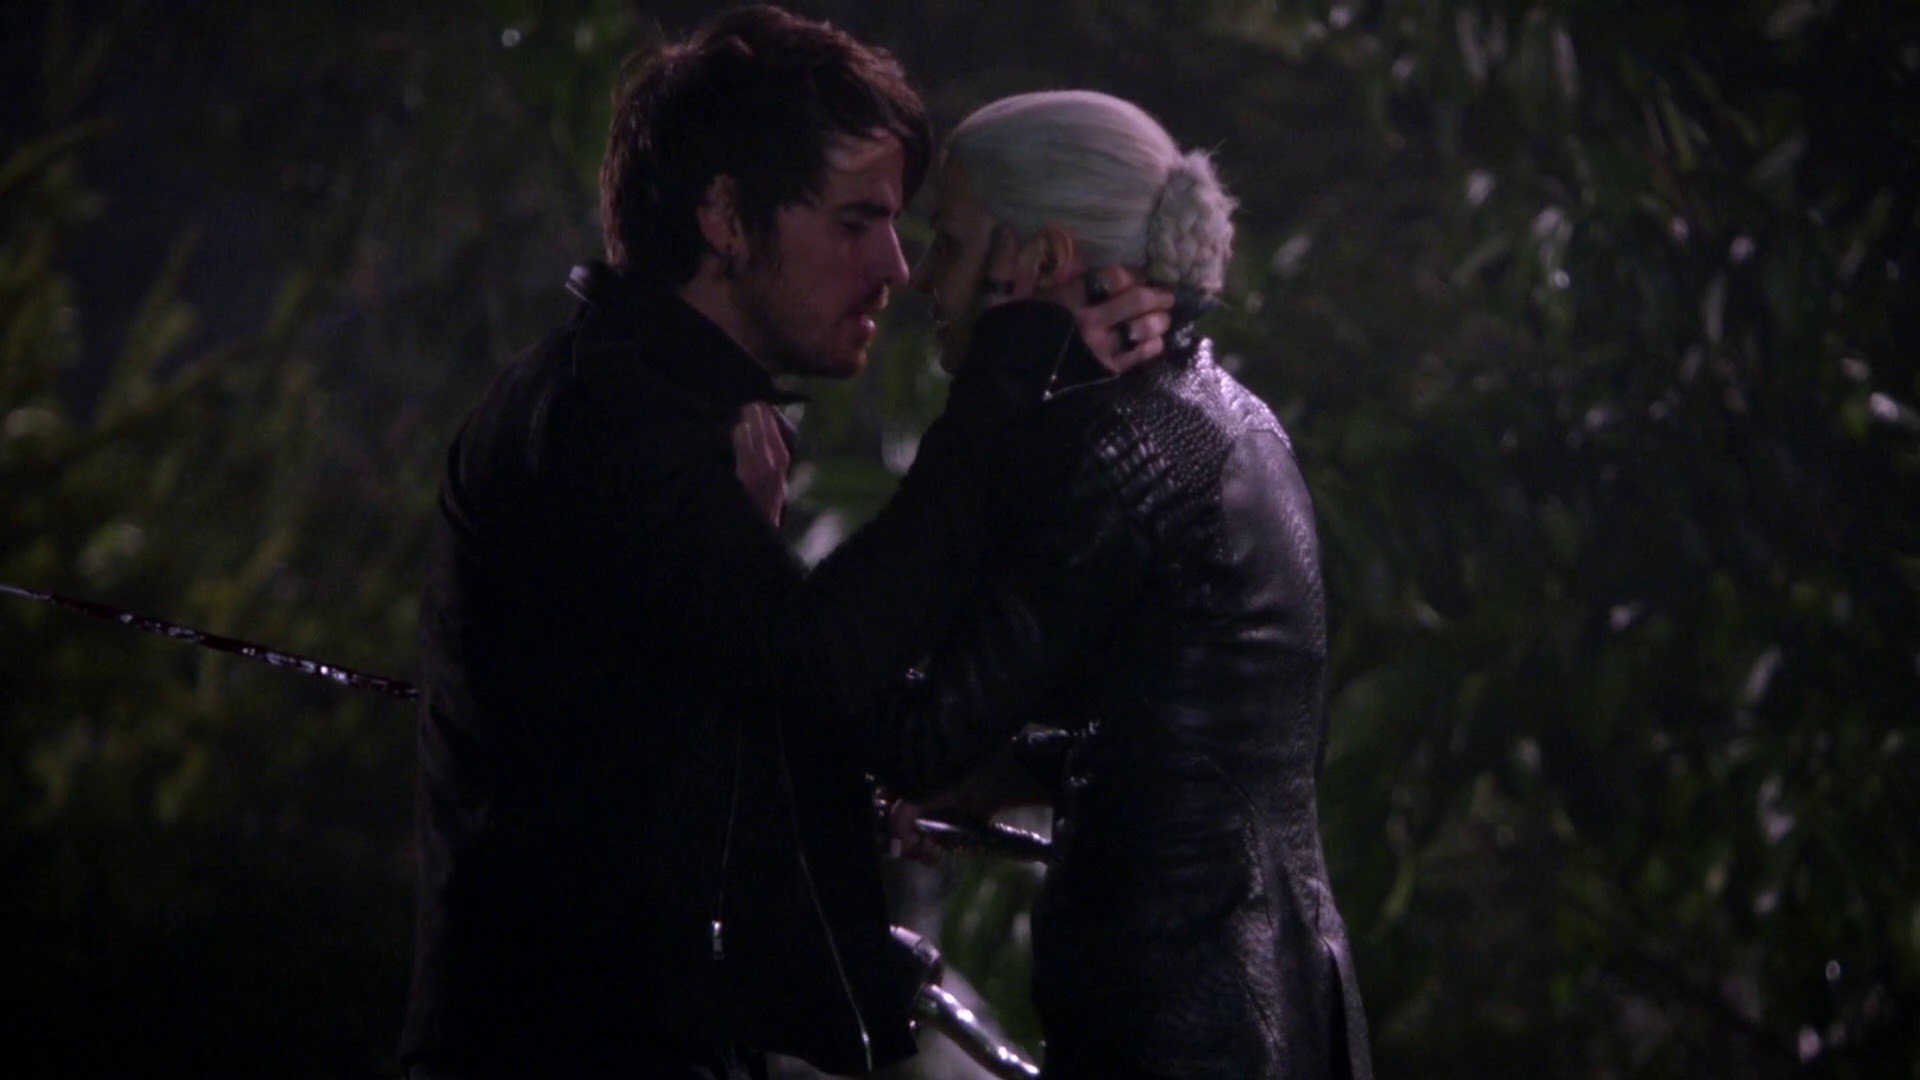 1920x1080 Once Upon a Time 5x11 Swan Song - Emma stabs Hook snuffing out darkness